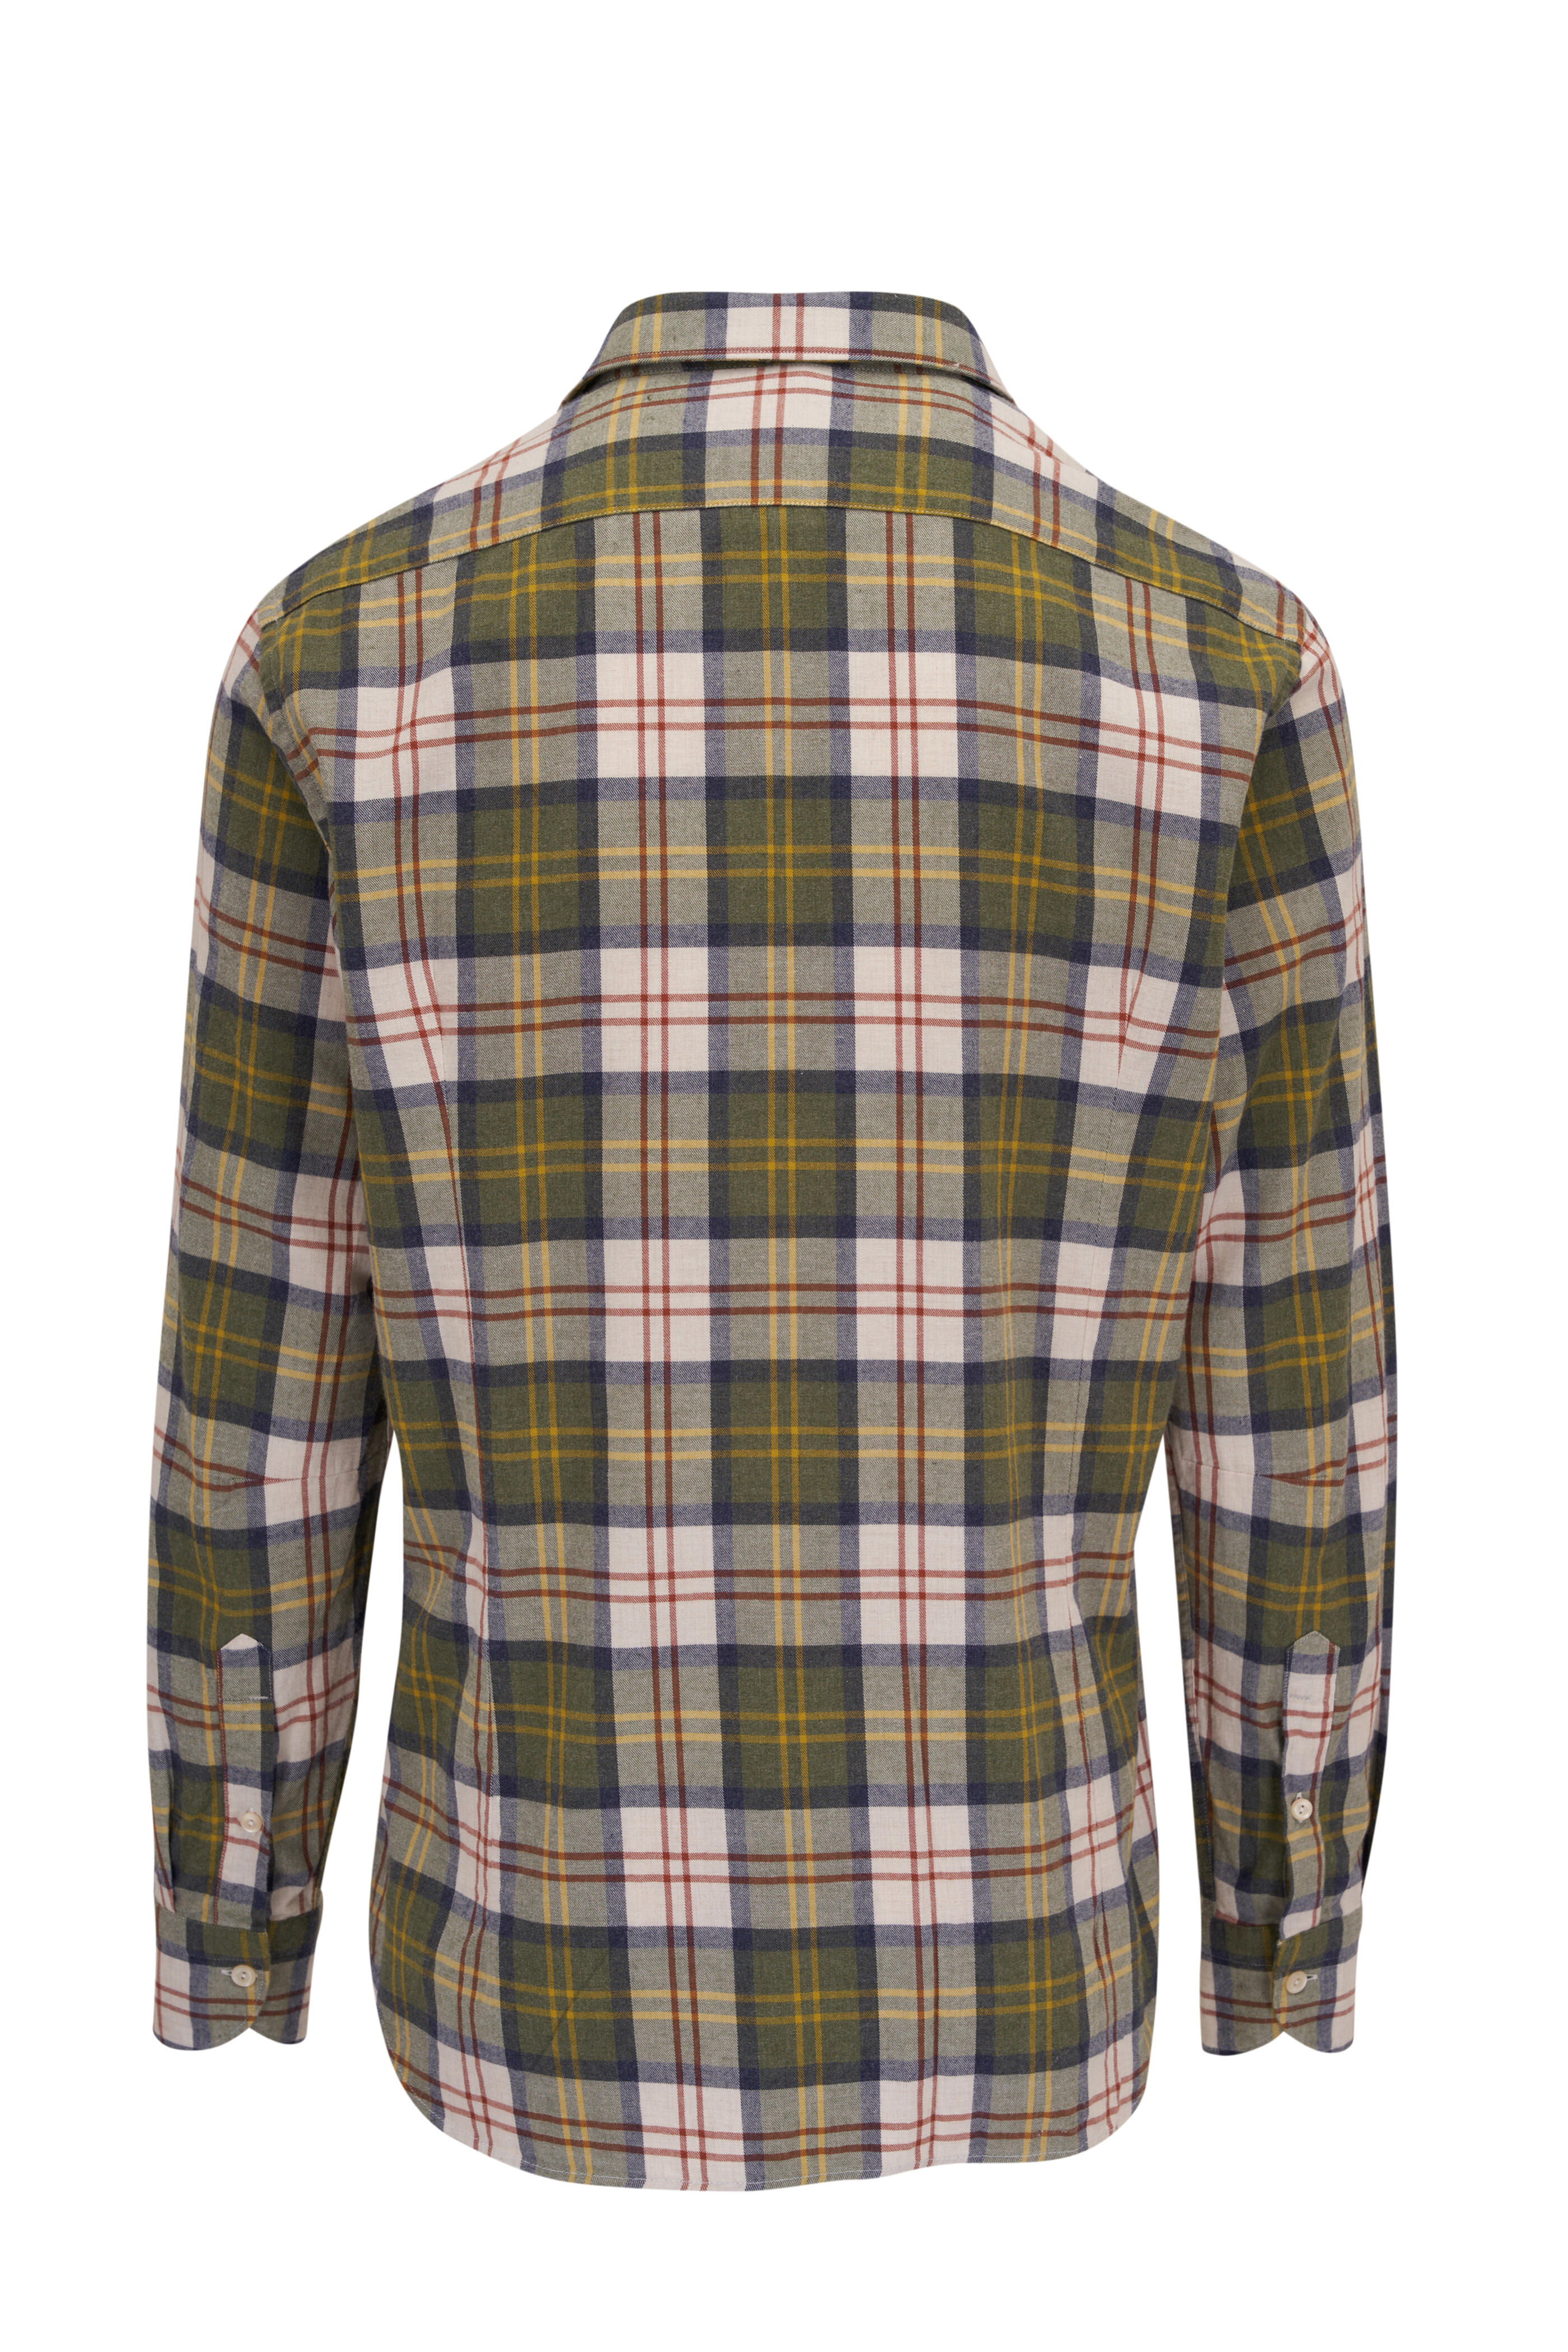 Tintoria - Olive & Yellow Plaid Flannel Sport Shirt